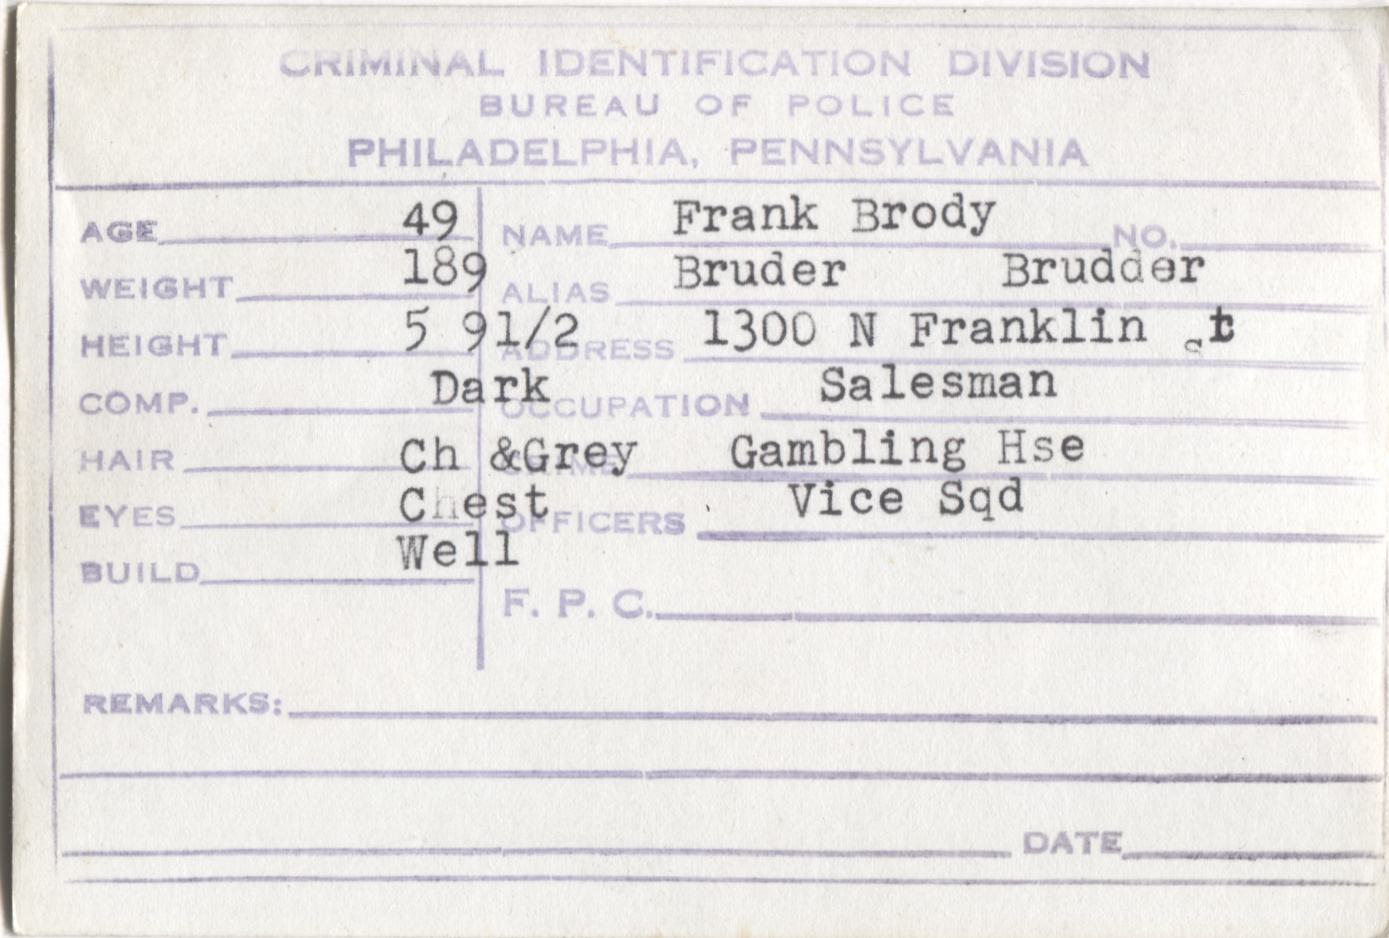 Frank Brody Mugshot - Arrested on 11/22/1947 for Running a Gambling House